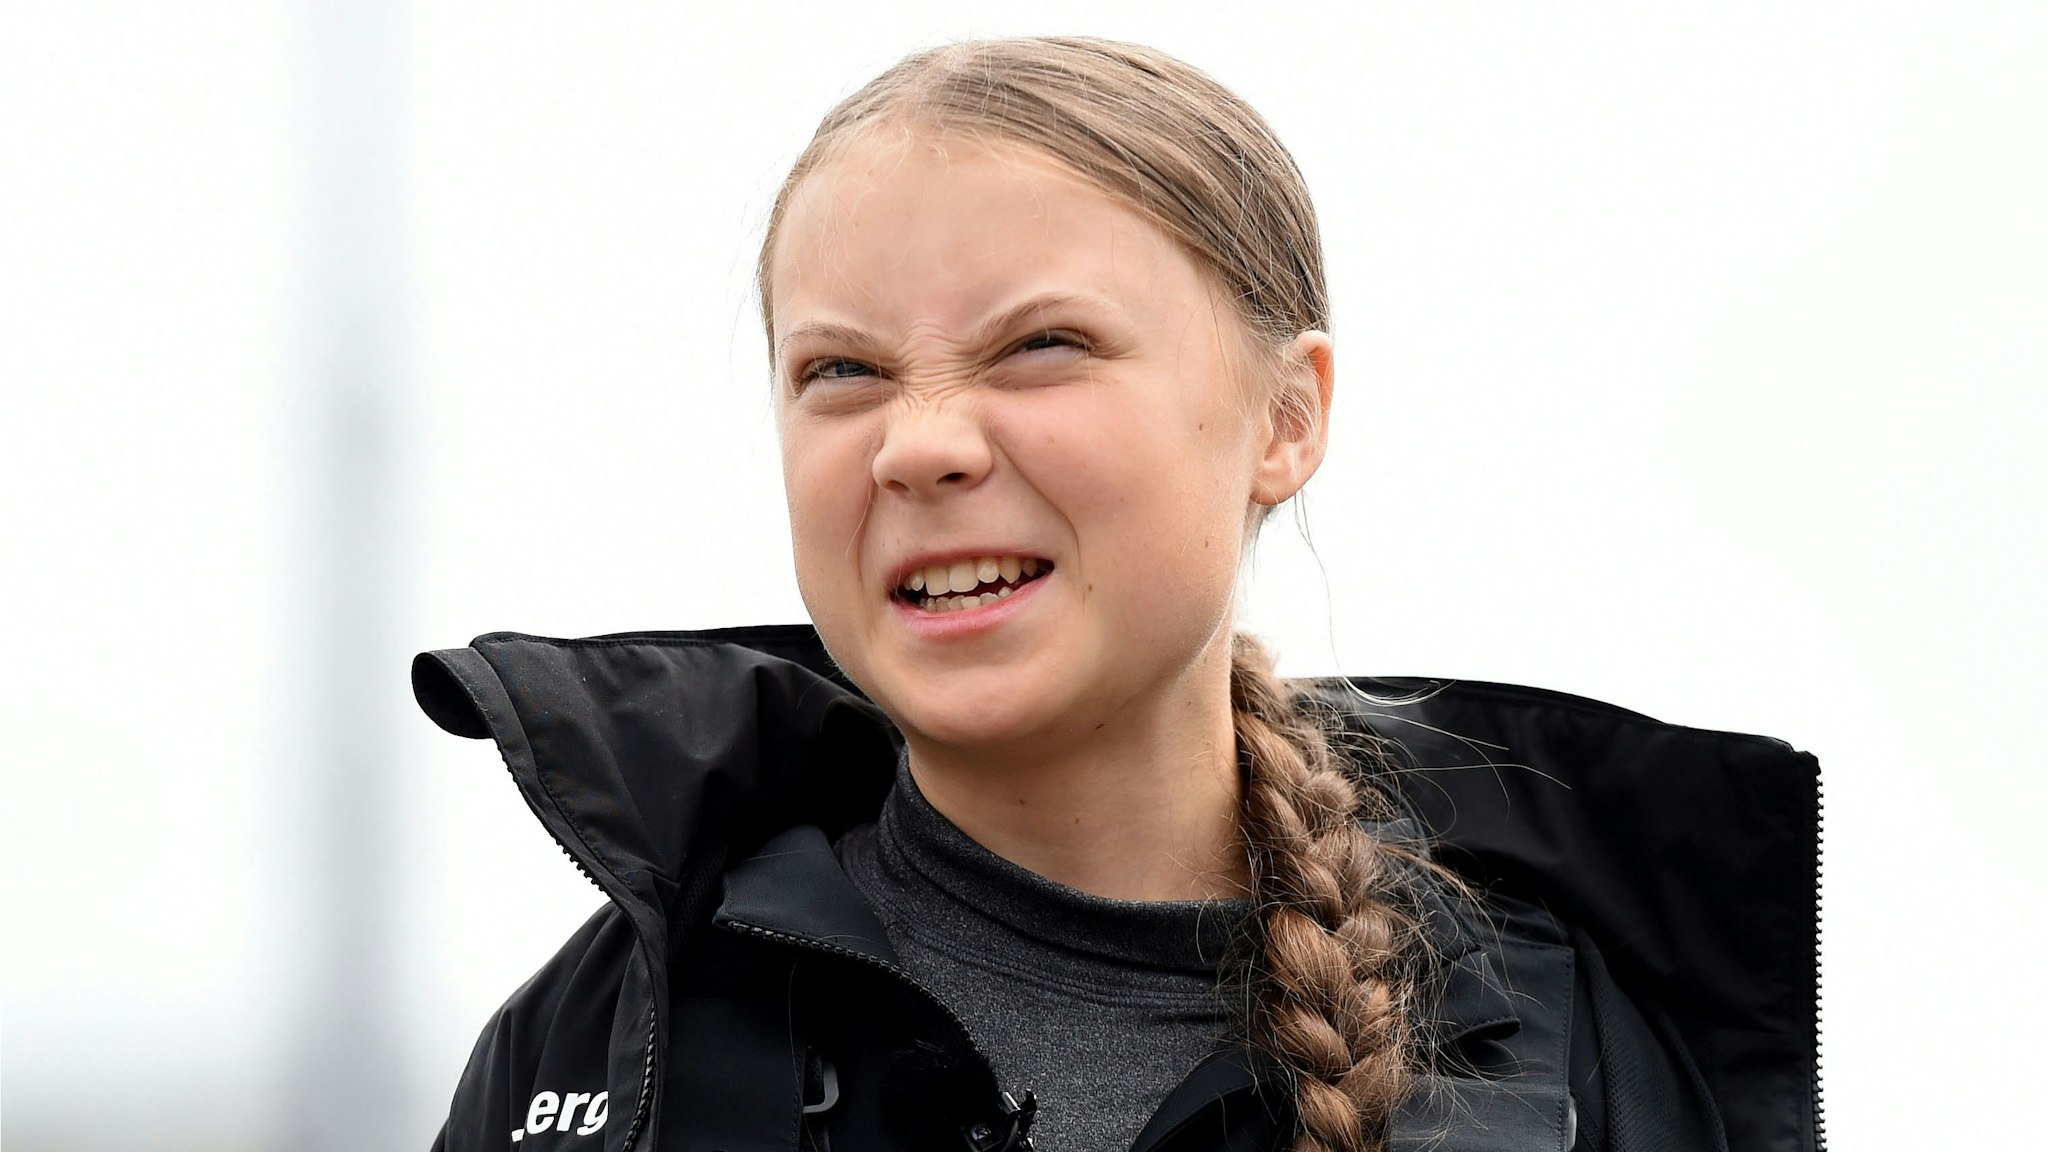 Climate change activist Greta Thunberg speaks at a press conference before setting sail for New York in the 60ft Malizia II yacht from Mayflower Marina, on August 14, 2019 in Plymouth, England. Greta Thunberg is a teenage activist born in Sweden in 2003. She began protesting outside the Belgian Parliament aged 15 and started the School Strike for Climate movement which has gained global popularity seeing school students campaigning against Climate Change on Fridays instead of attending their lessons. Greta has stopped flying as the aviation industry is responsible for 12% of CO2 emissions from all forms of transports. Once in New York she will attend a climate change conference.